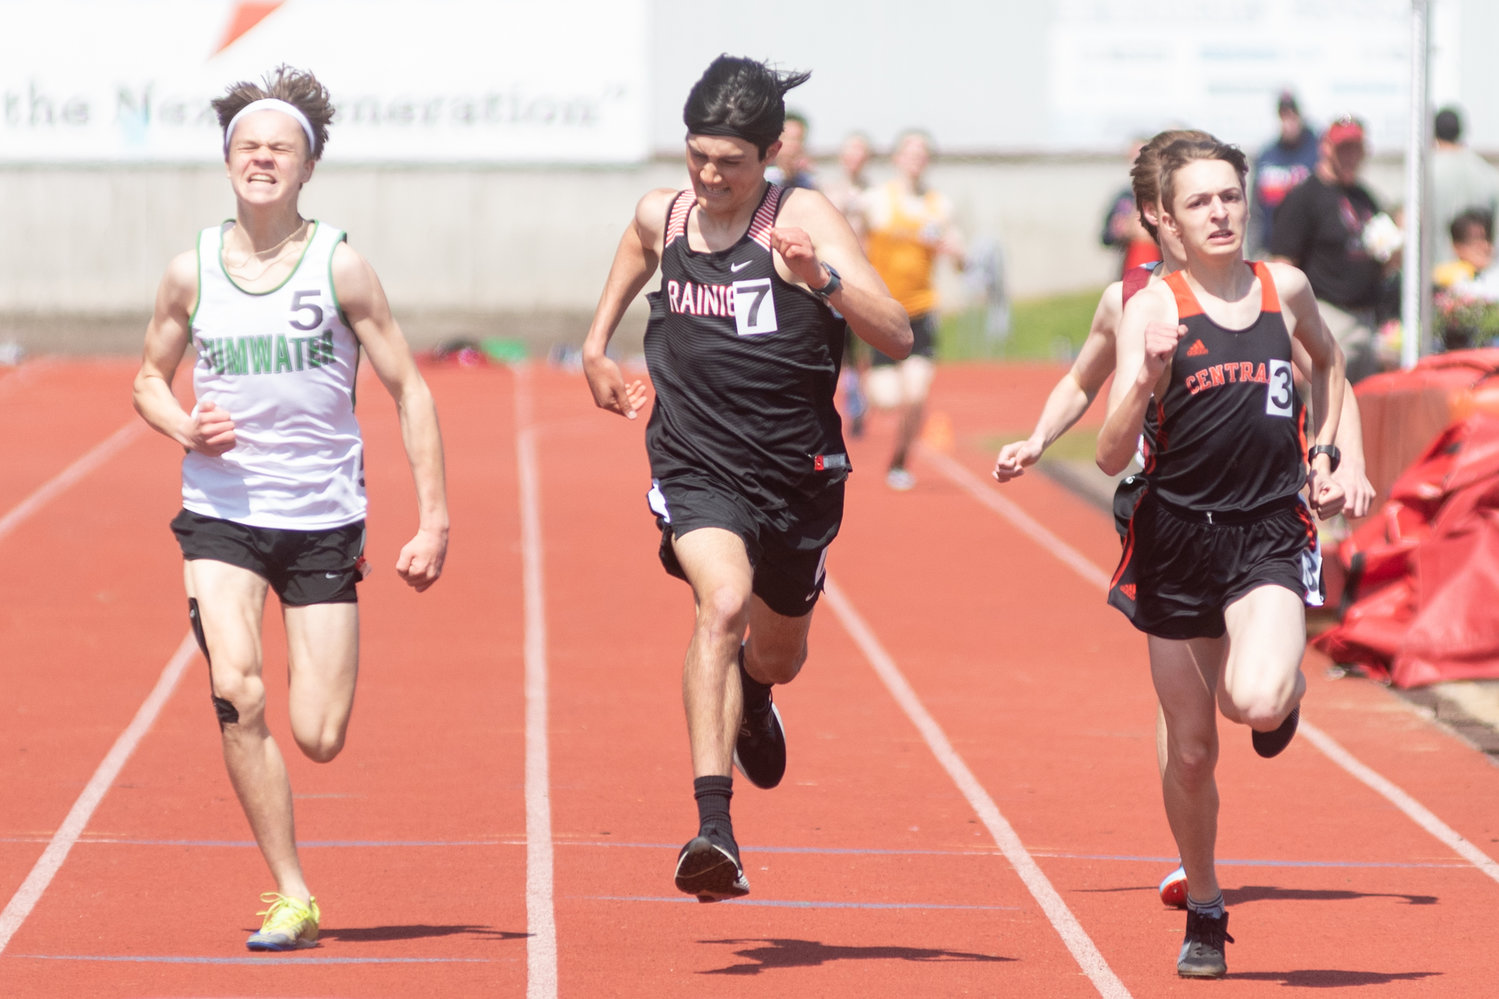 Tumwater's Brenden Hamilton (left), Rainier's Dylan Davis (middle), and Centralia's Devin Harrison (right) race toward a photo finish at the Chehalis Activators Classic April 23 at W.F. West in the 1600 meters.